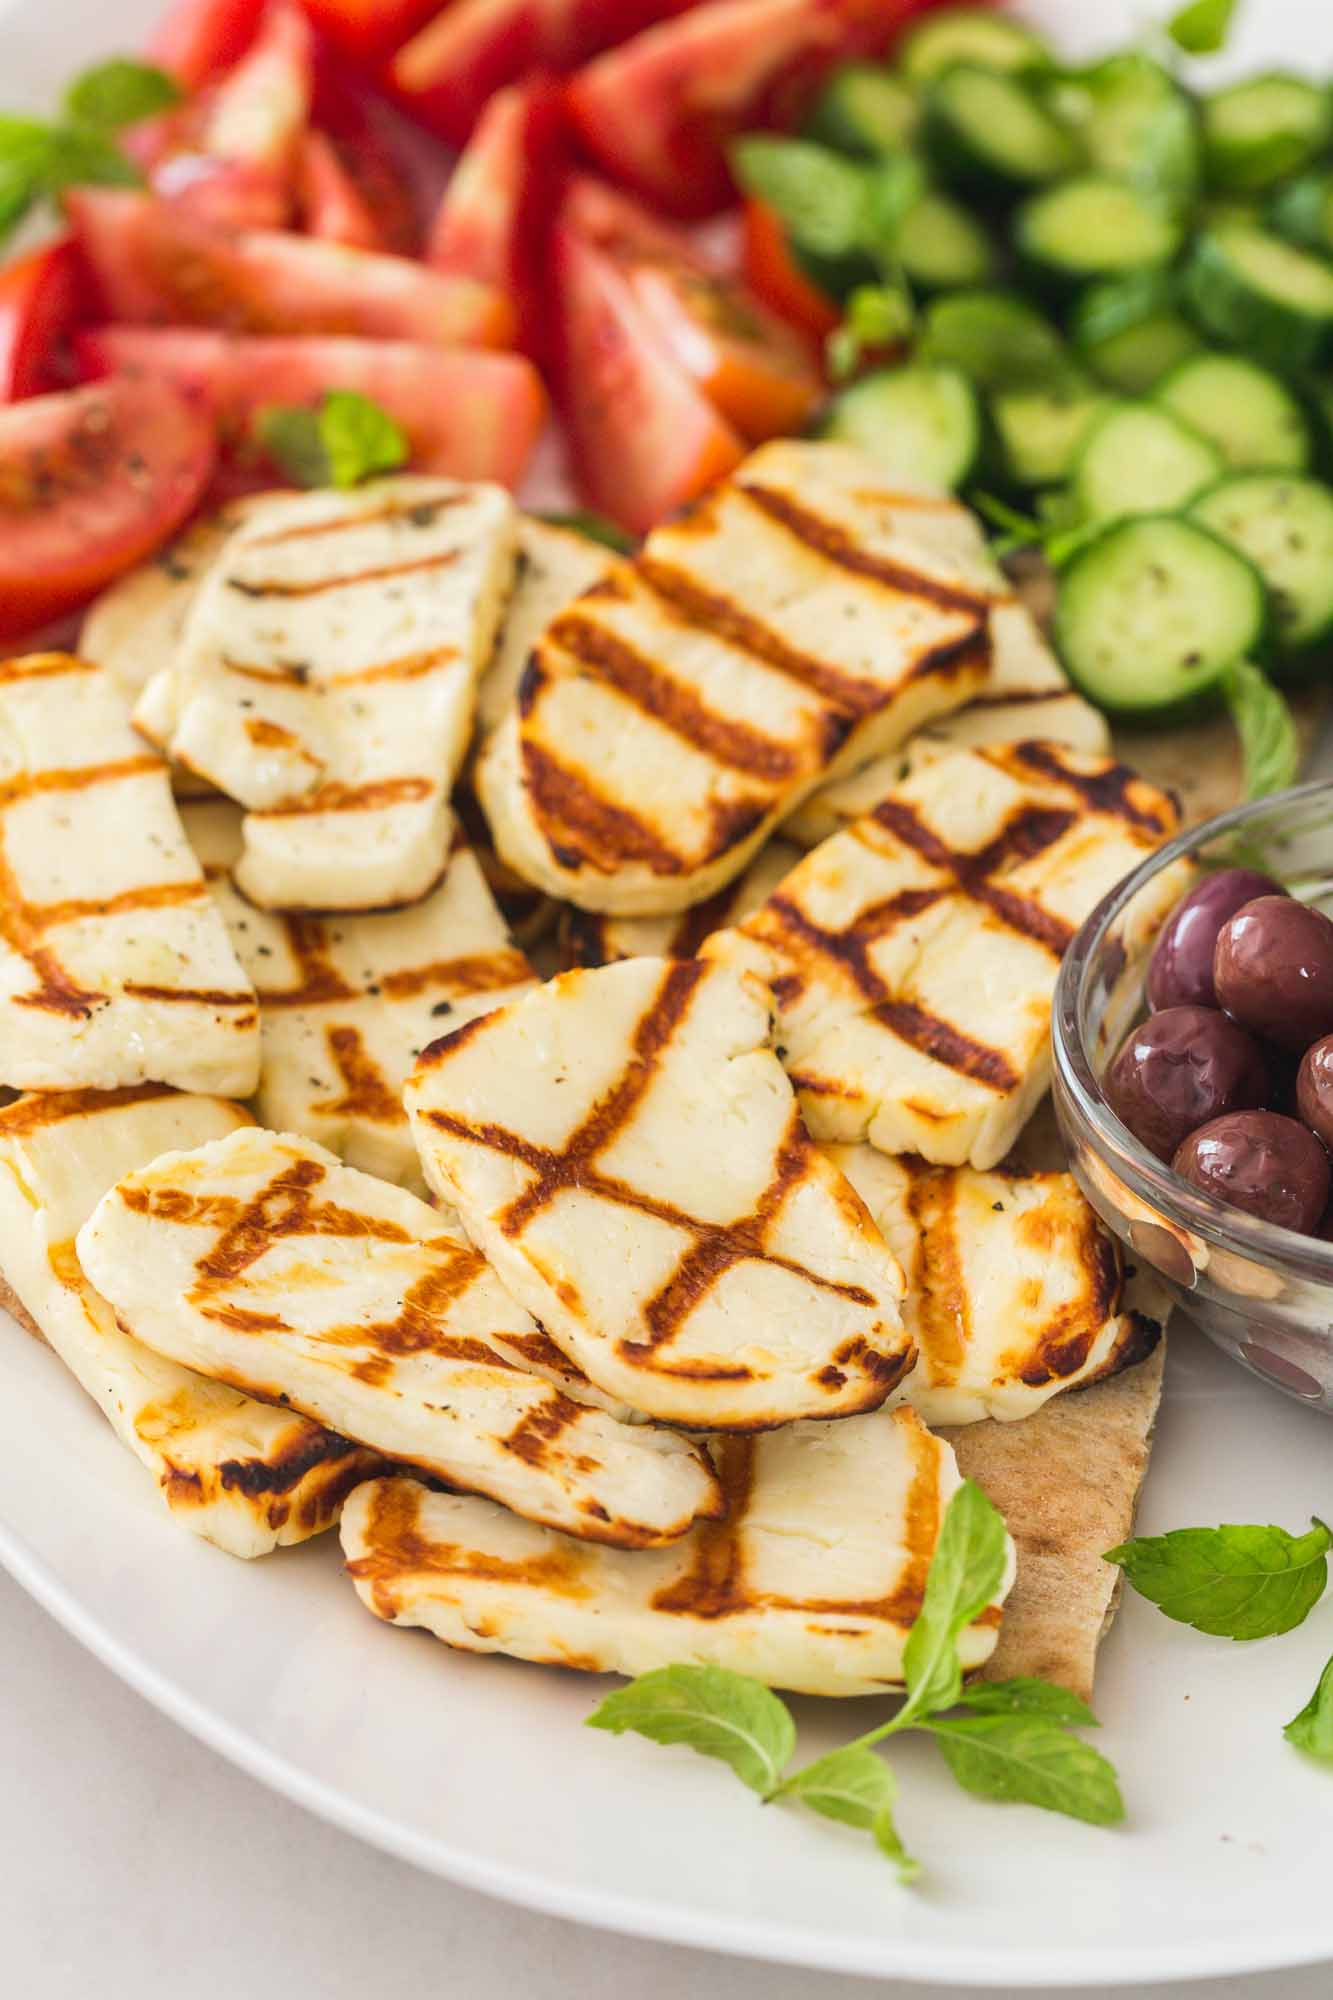 Grilled Halloumi Cheese Recipe (The Cheese That Doesn’t Melt!)